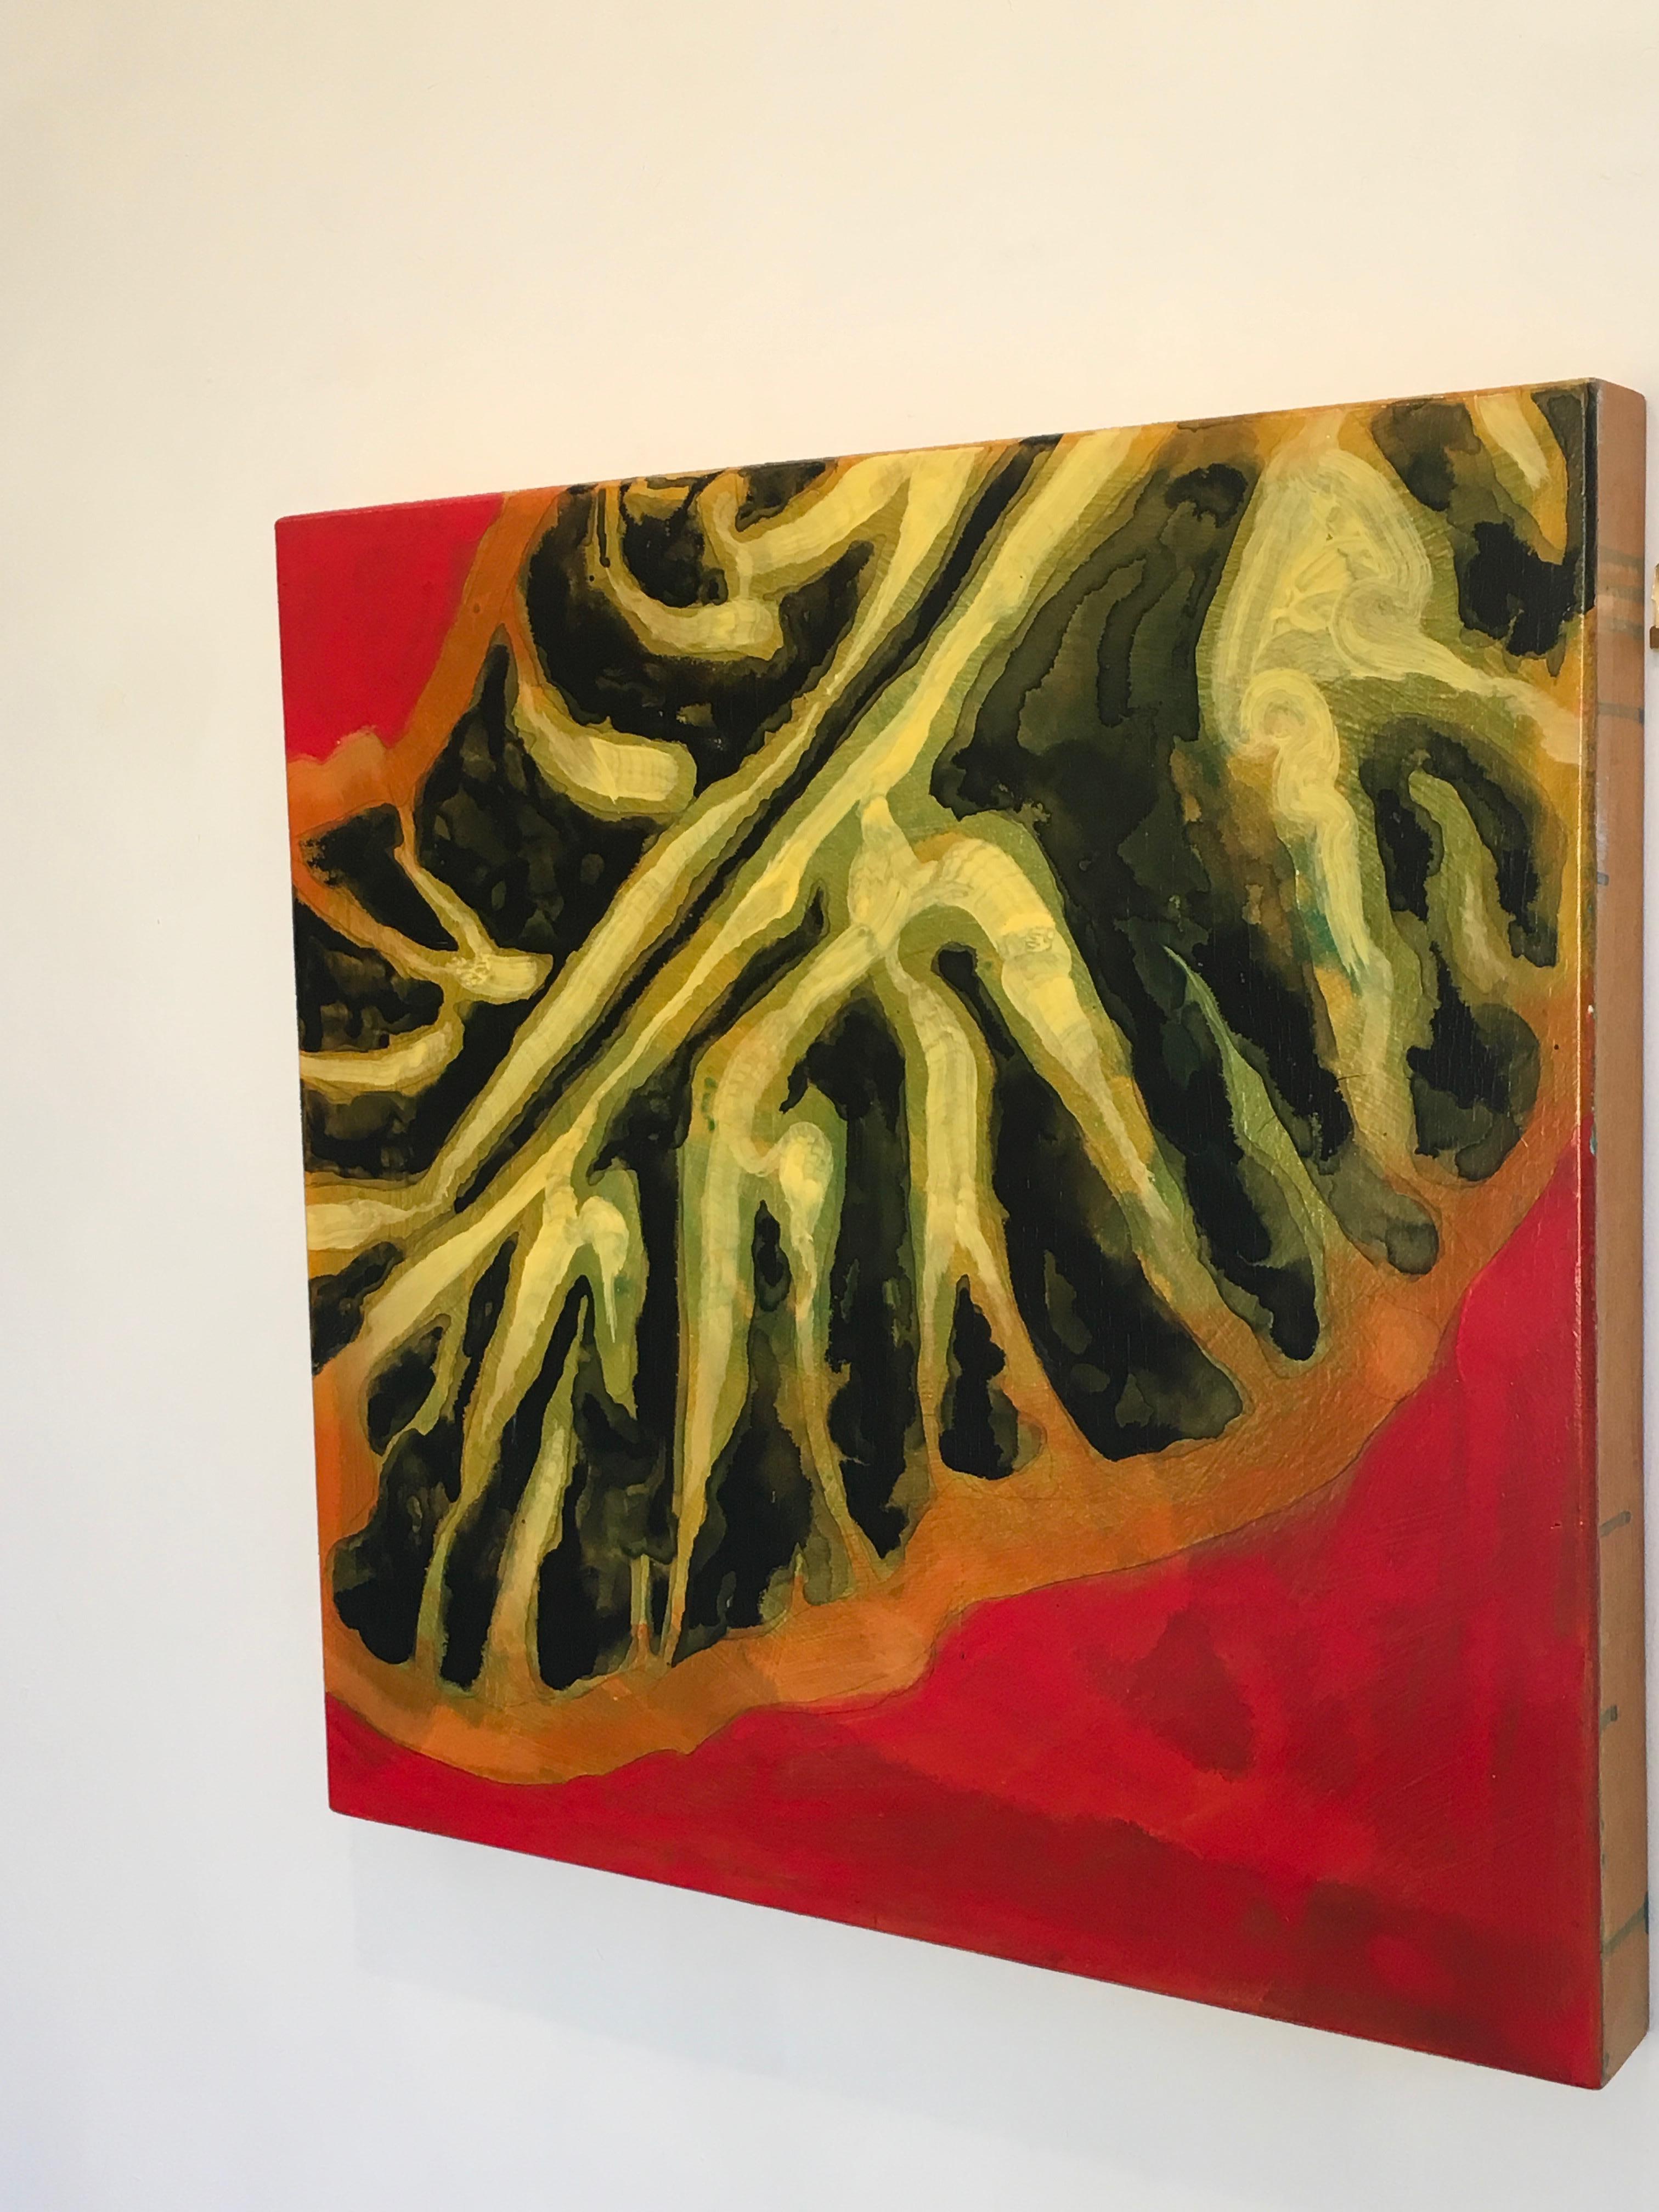 Flat, painting inspired by Hawaii Fish, Red, black, Green, Oil, Ink on panel - Contemporary Painting by Carol Bennett